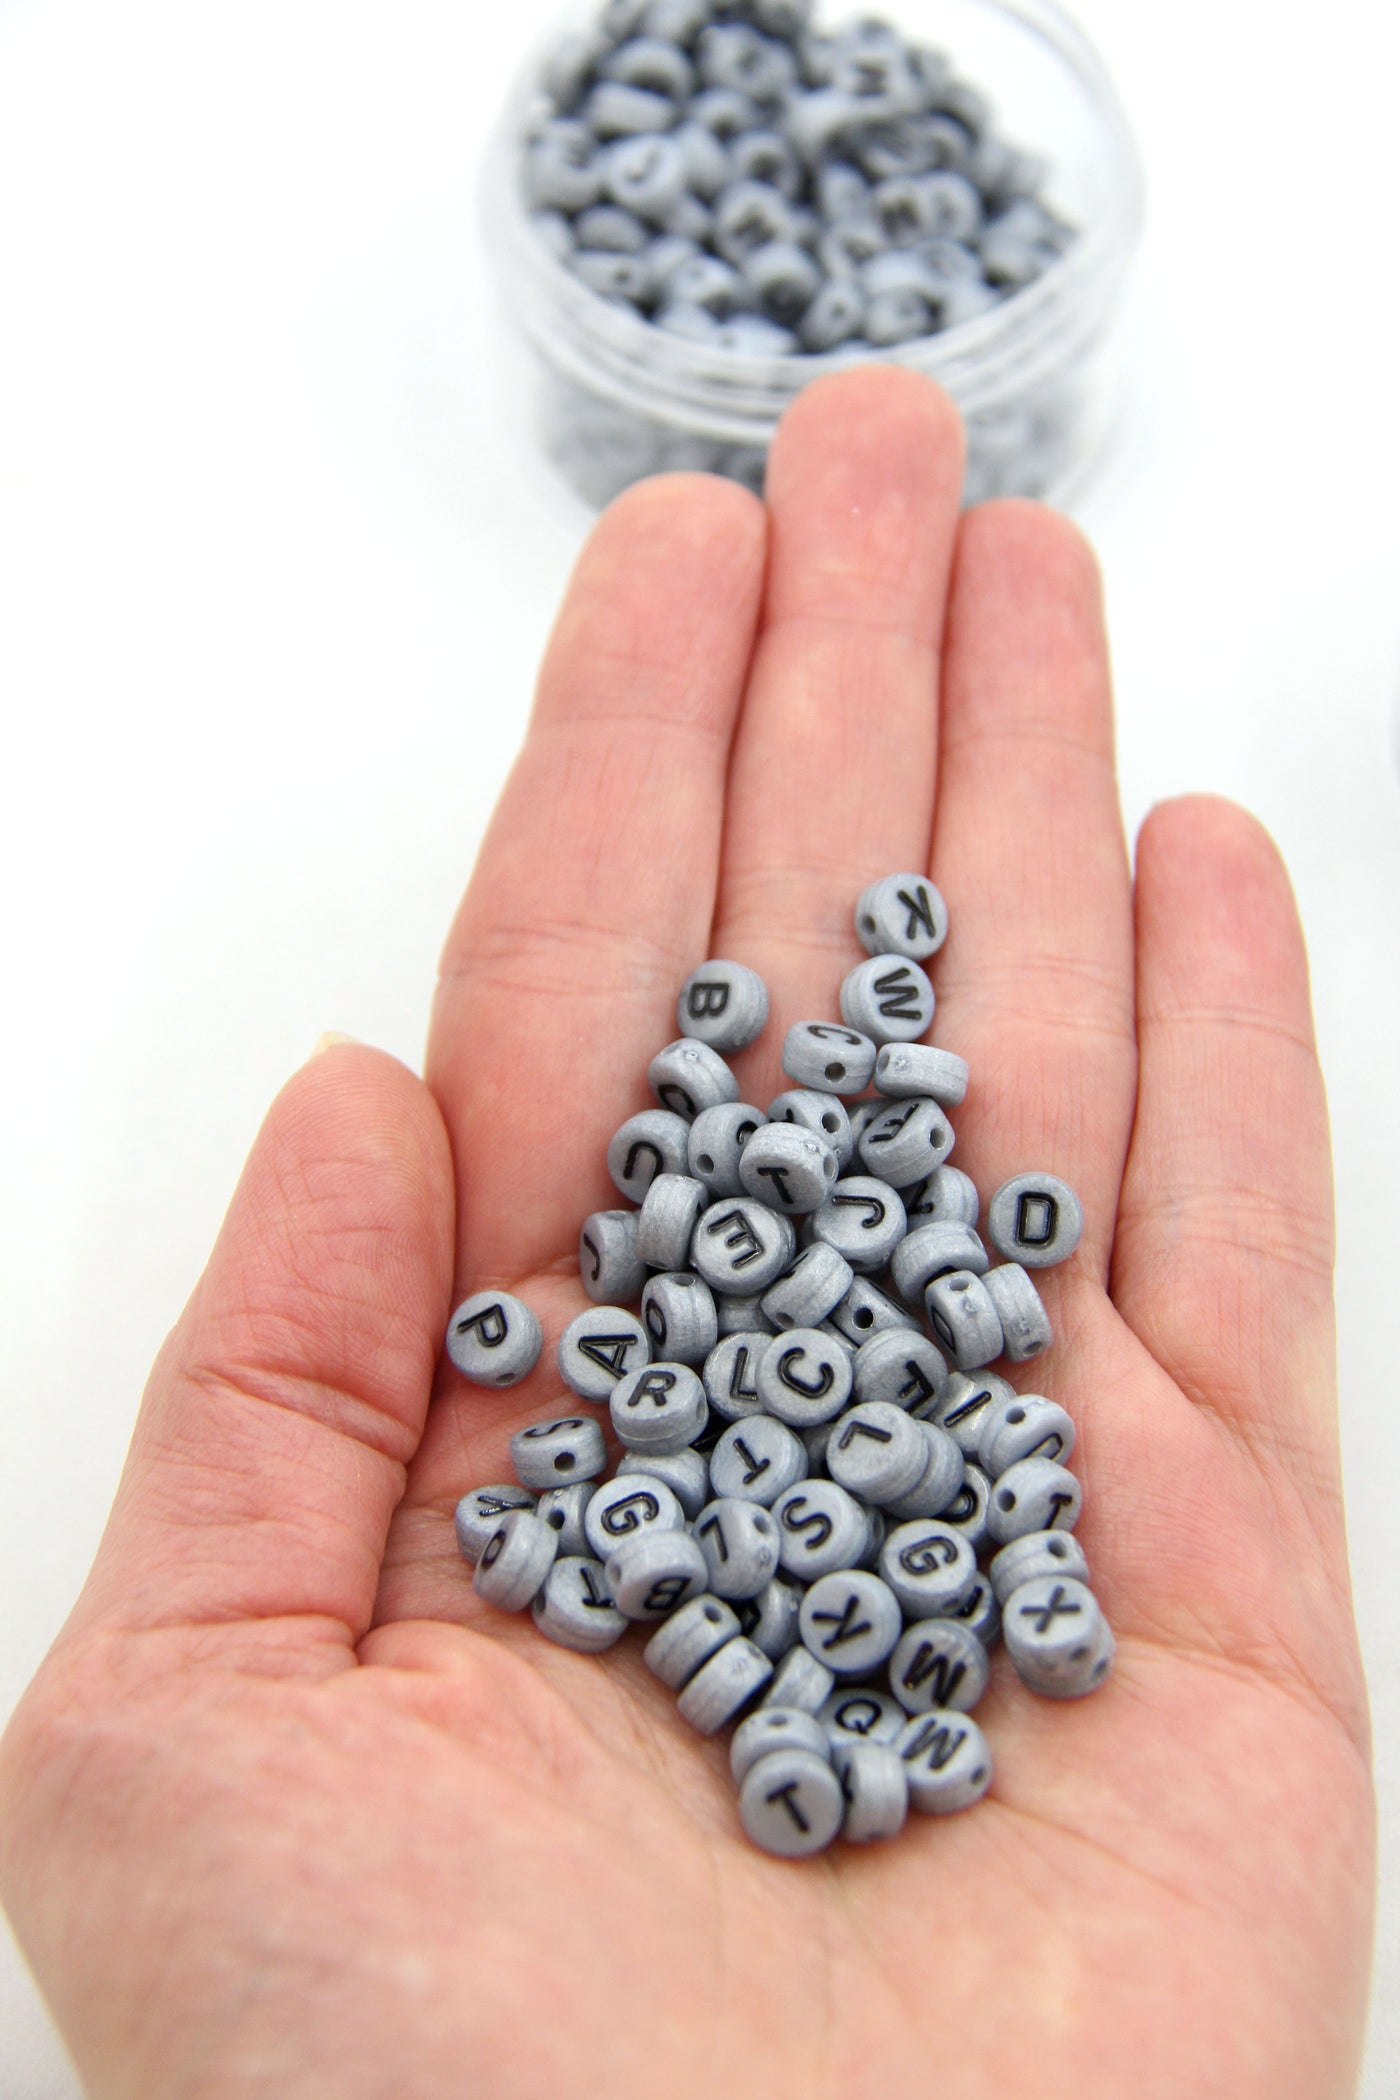 Silver & Gold Alphabet Letter Beads, Acrylic, 7mm Round